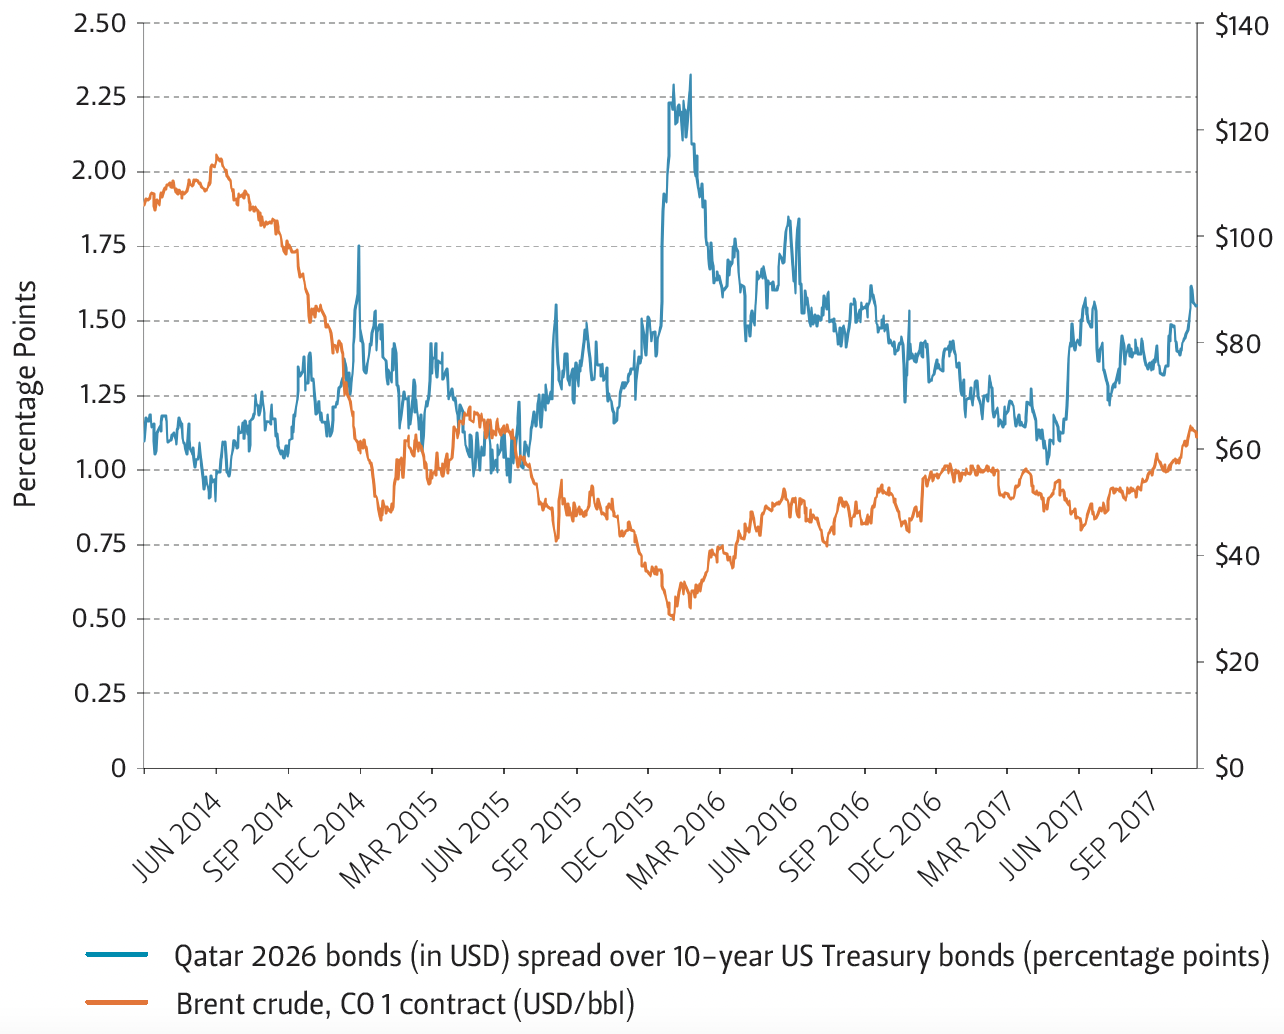 This graph compares Qatari 10-year bonds and 10-year U.S. Treasury bonds with Brent Crude Oil prices.